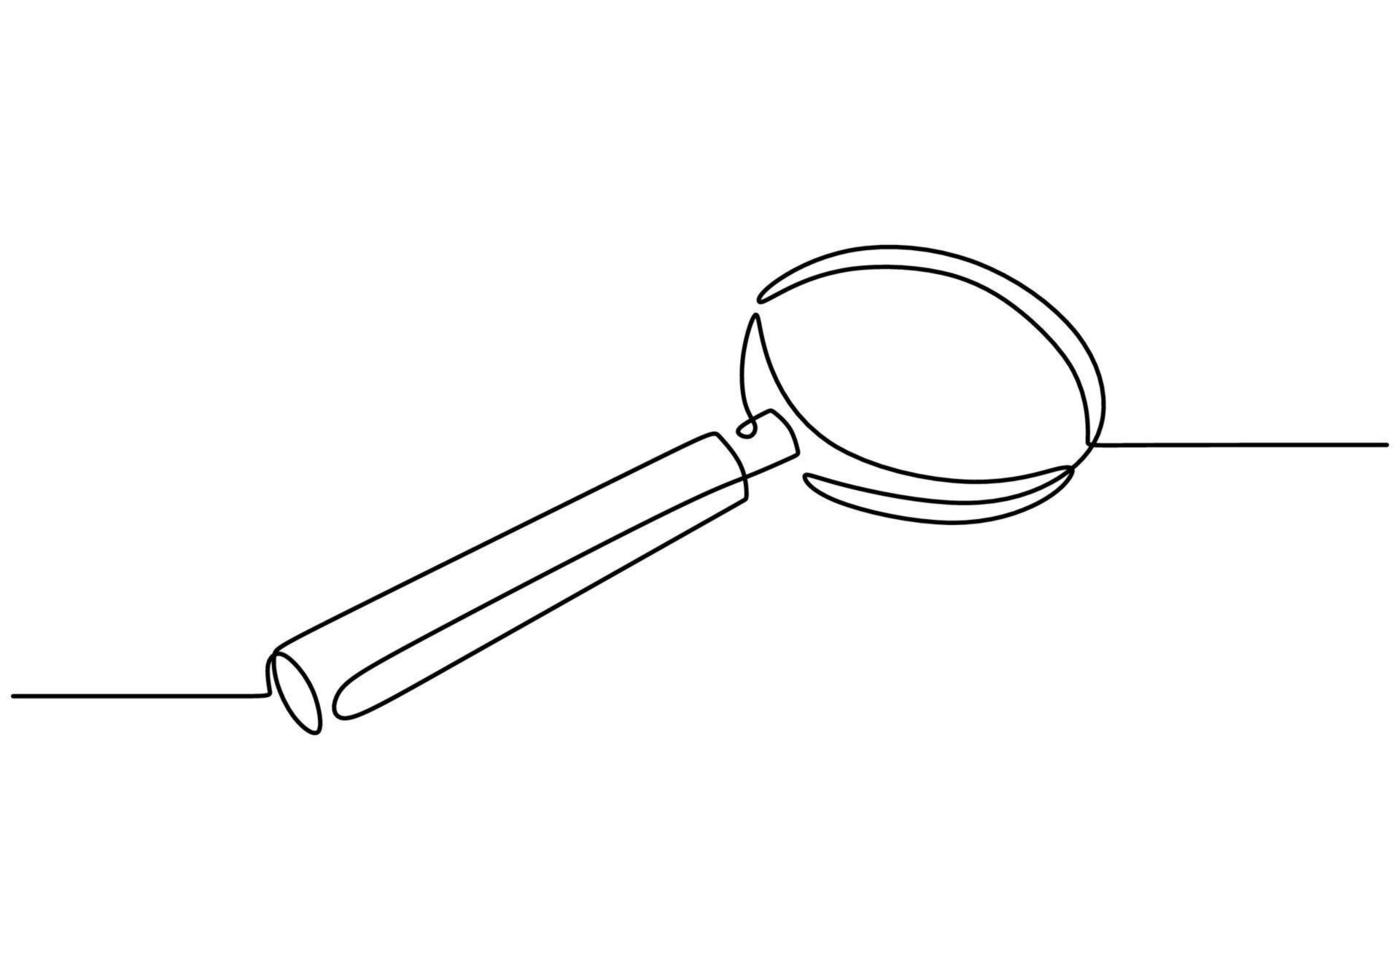 Continuous one single line of magnifying glass vector